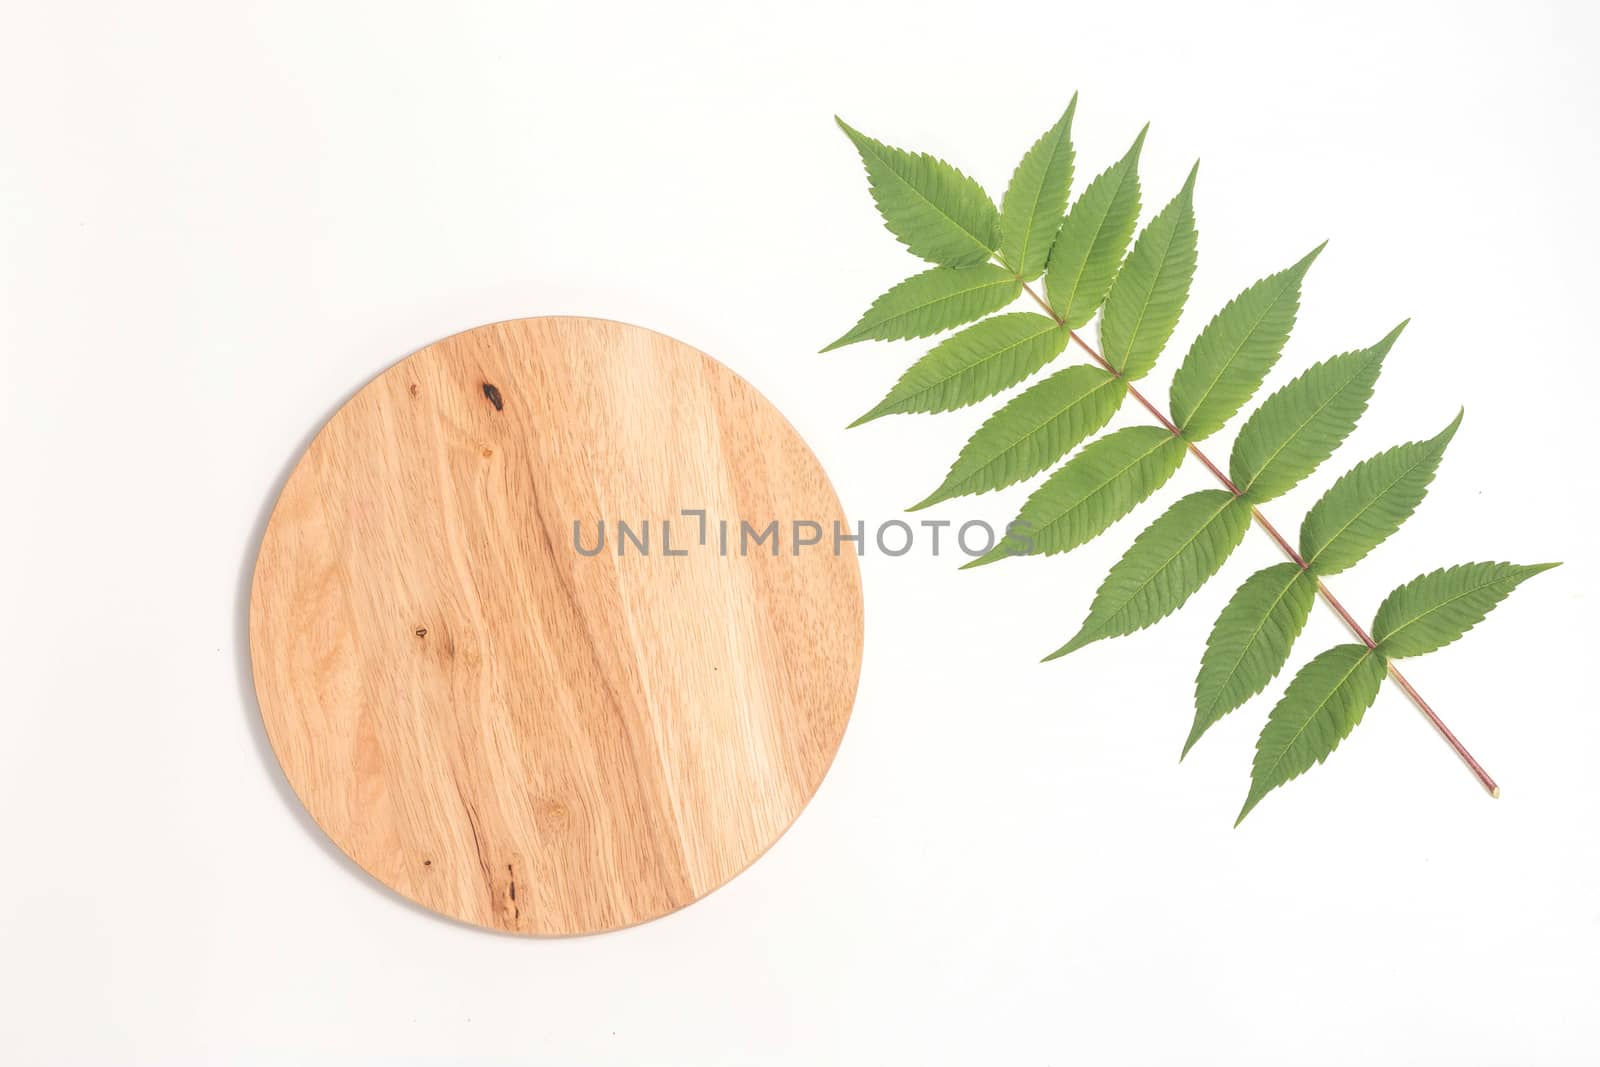 Bamboo Cutting Board with green leaf of white whalnut on white background by galinasharapova